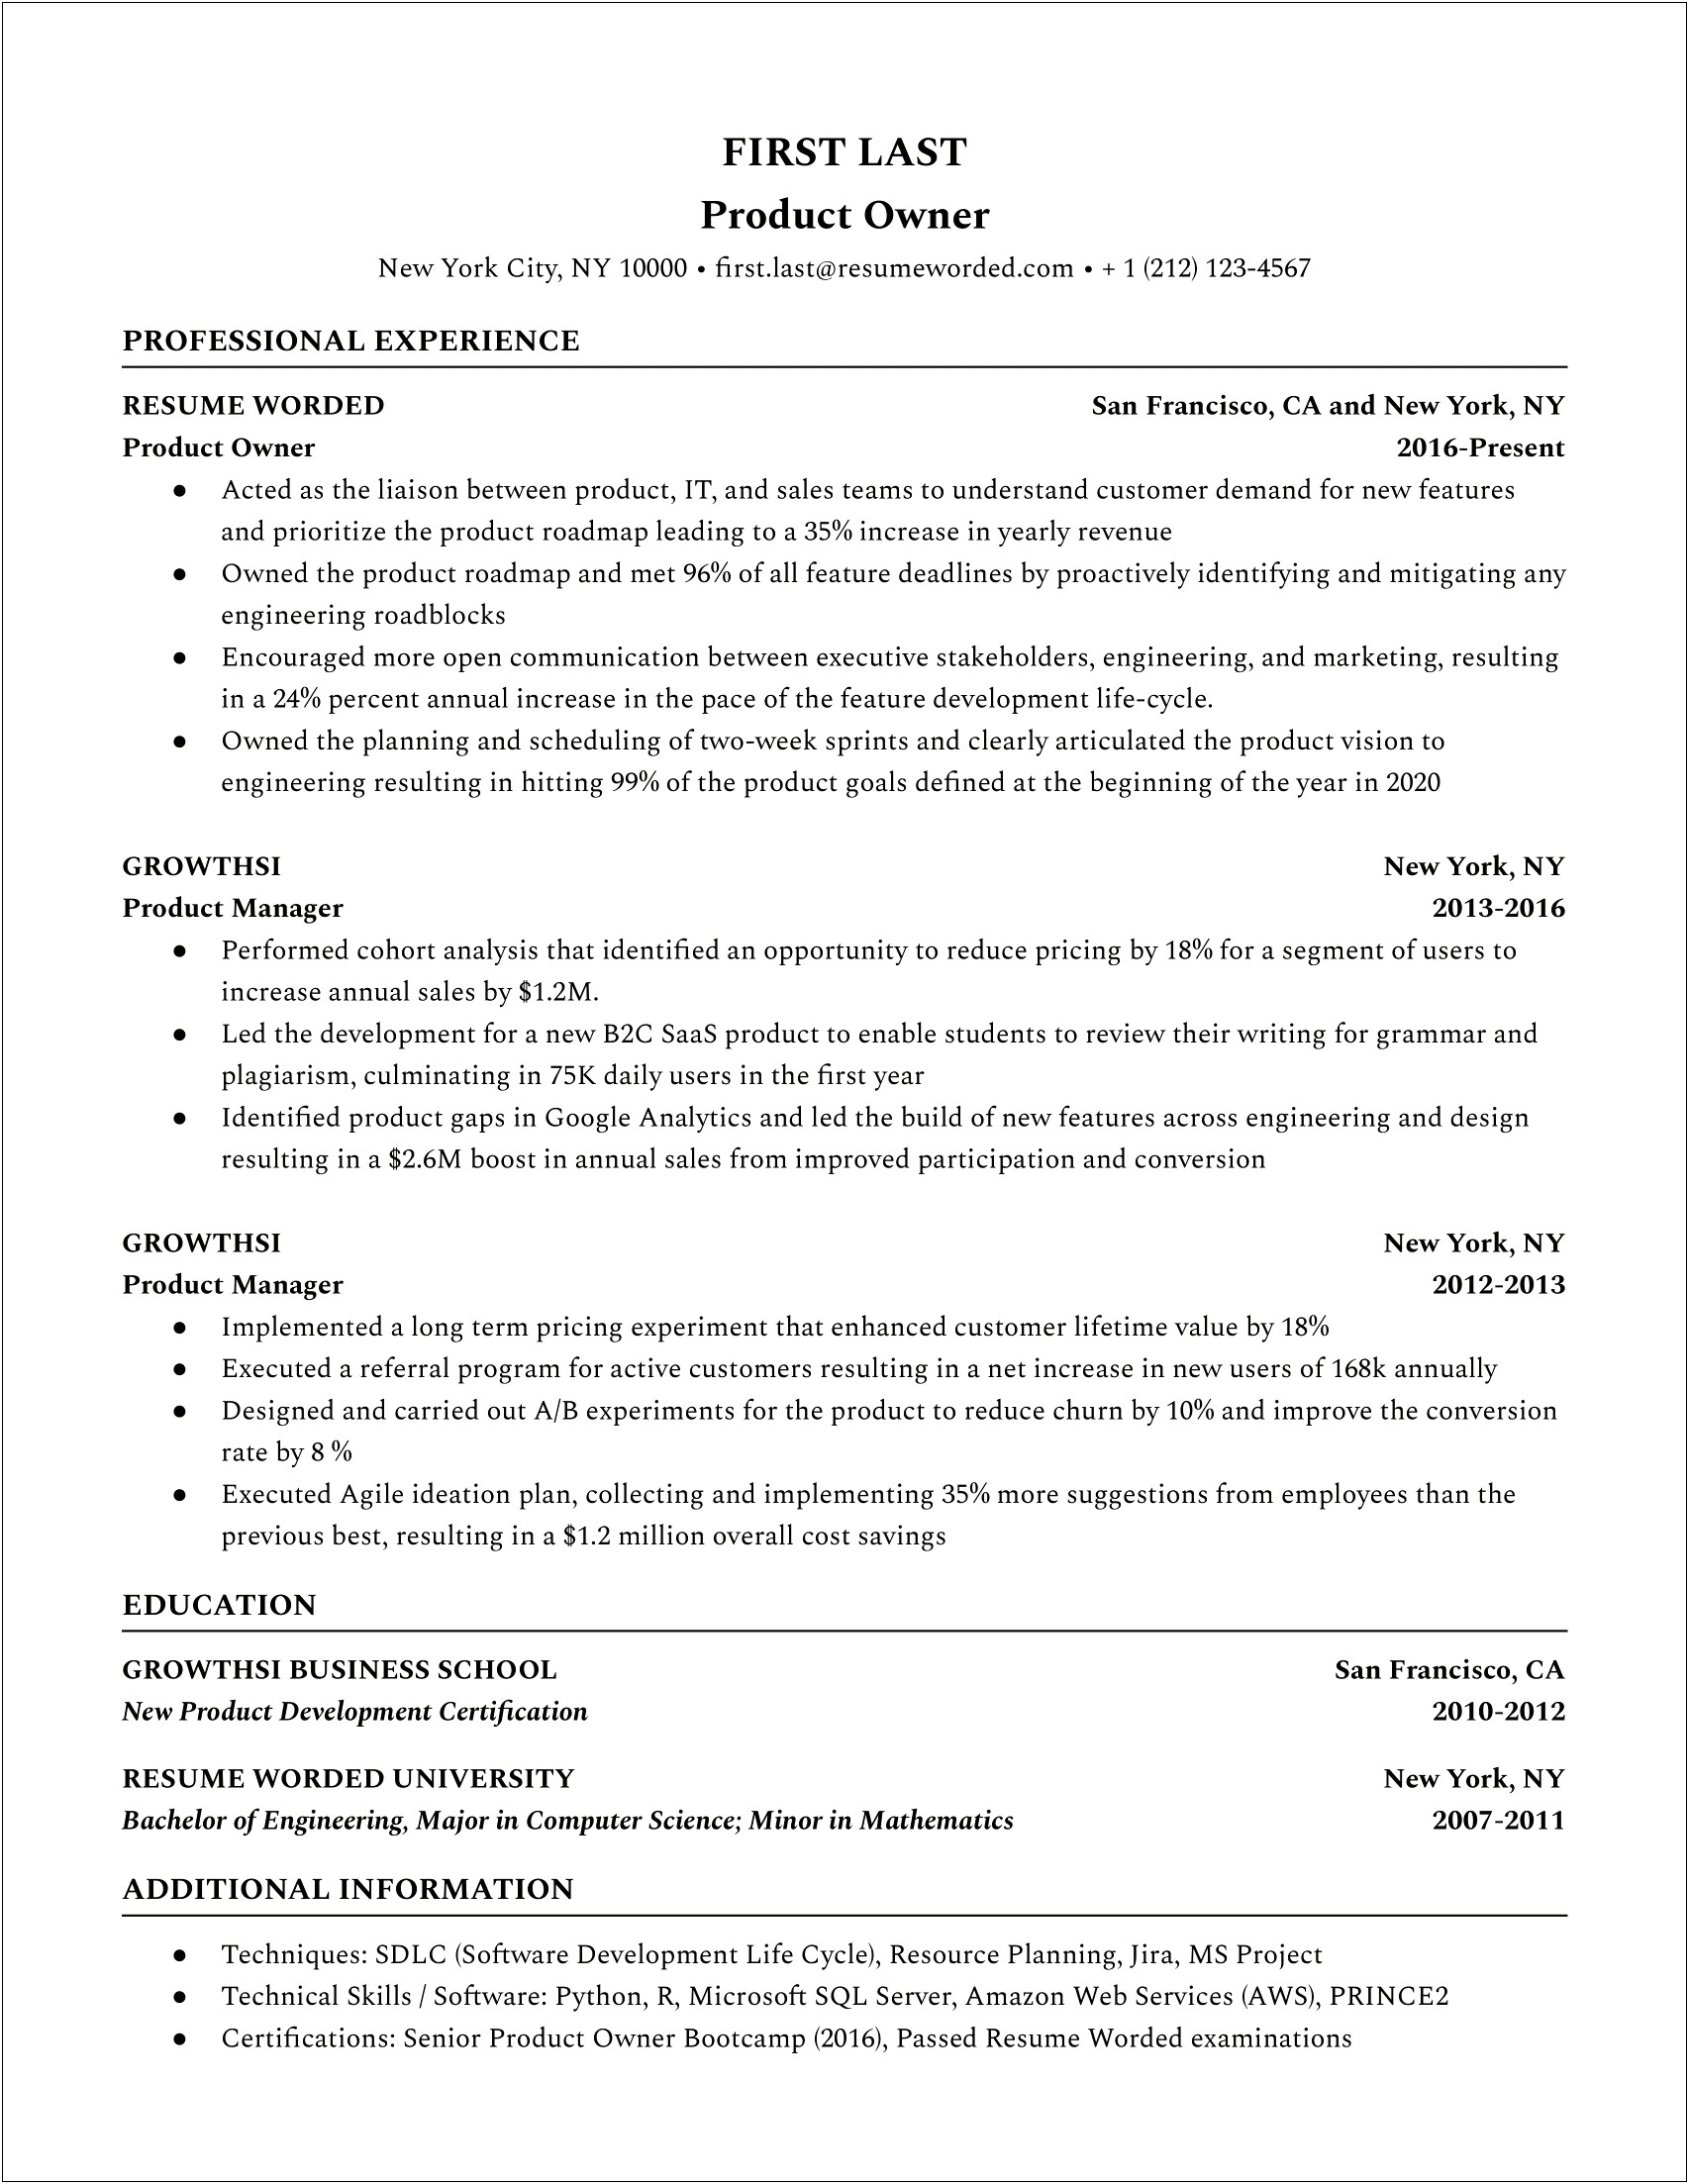 Professional Highlights For A Resume Examples